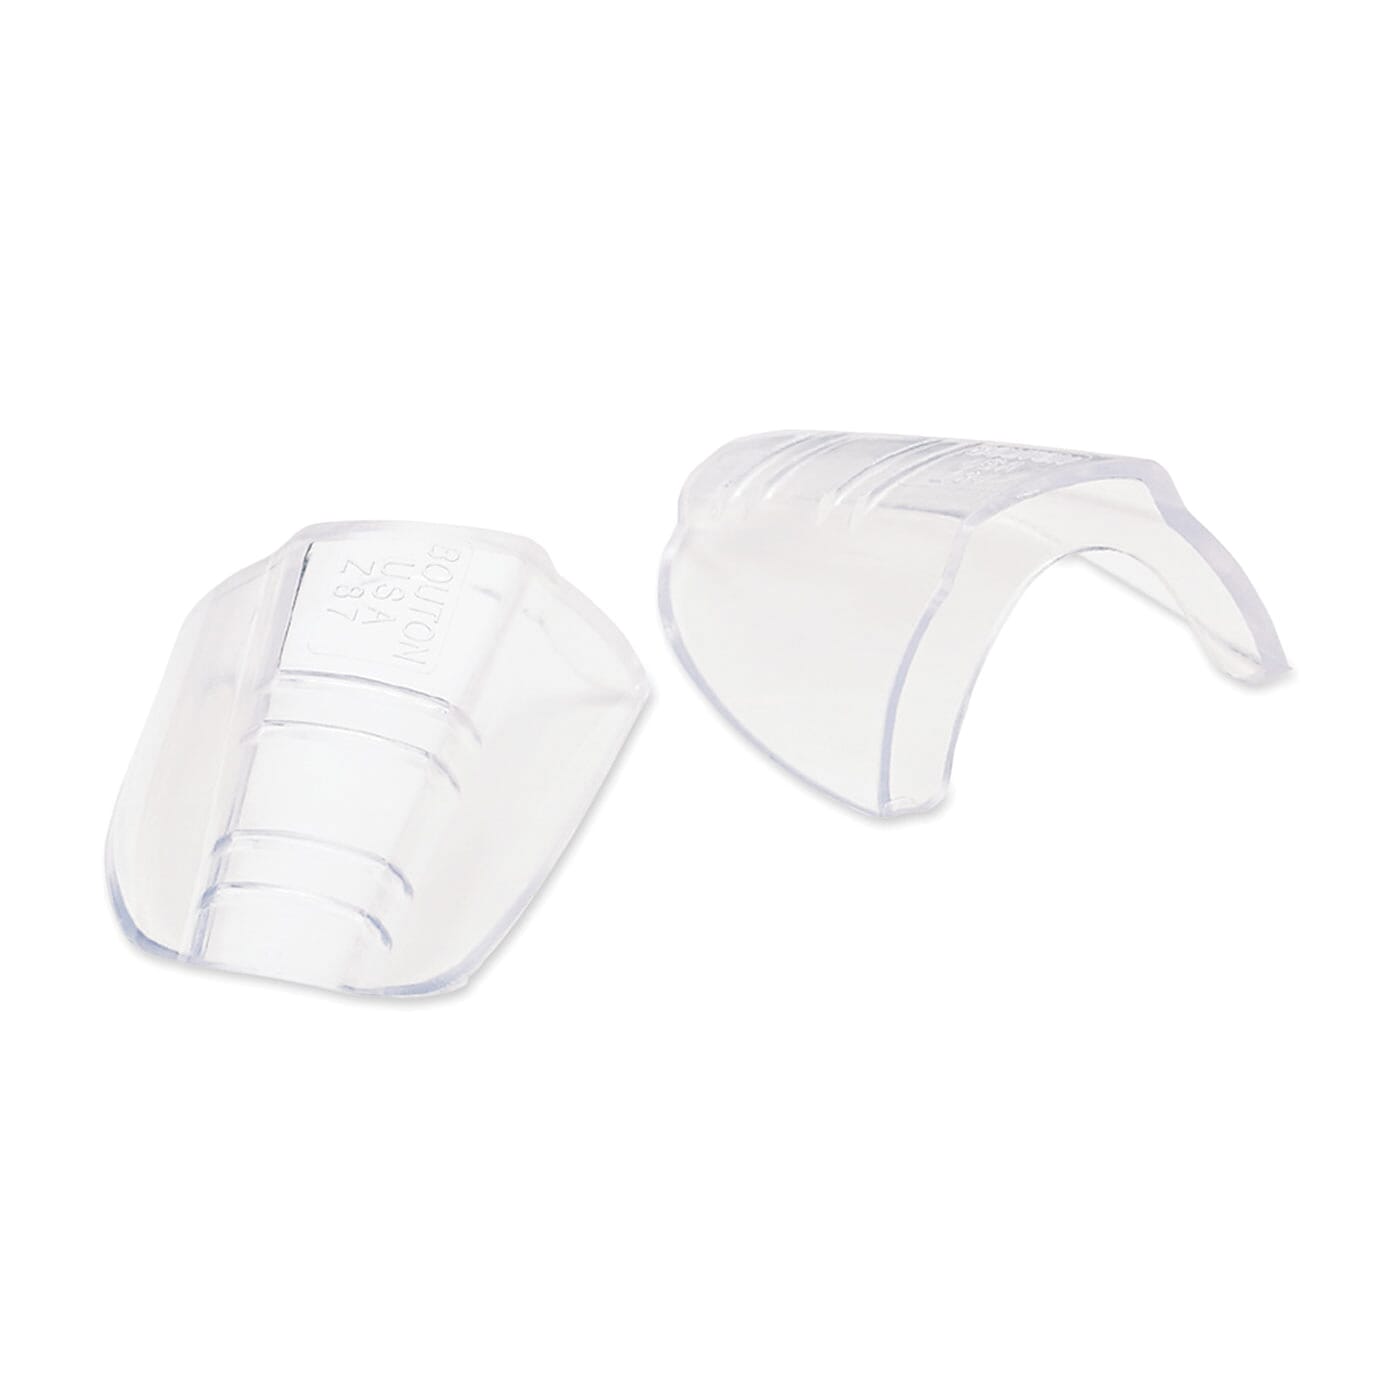 UNIVERSAL FLEX SIDESHIELDS CLEAR INDIVIDUALLY BAGGED PAIR 99705 Eyewear | Protective Industrial Products 252-FX-0001 PIP1252-FX-0001